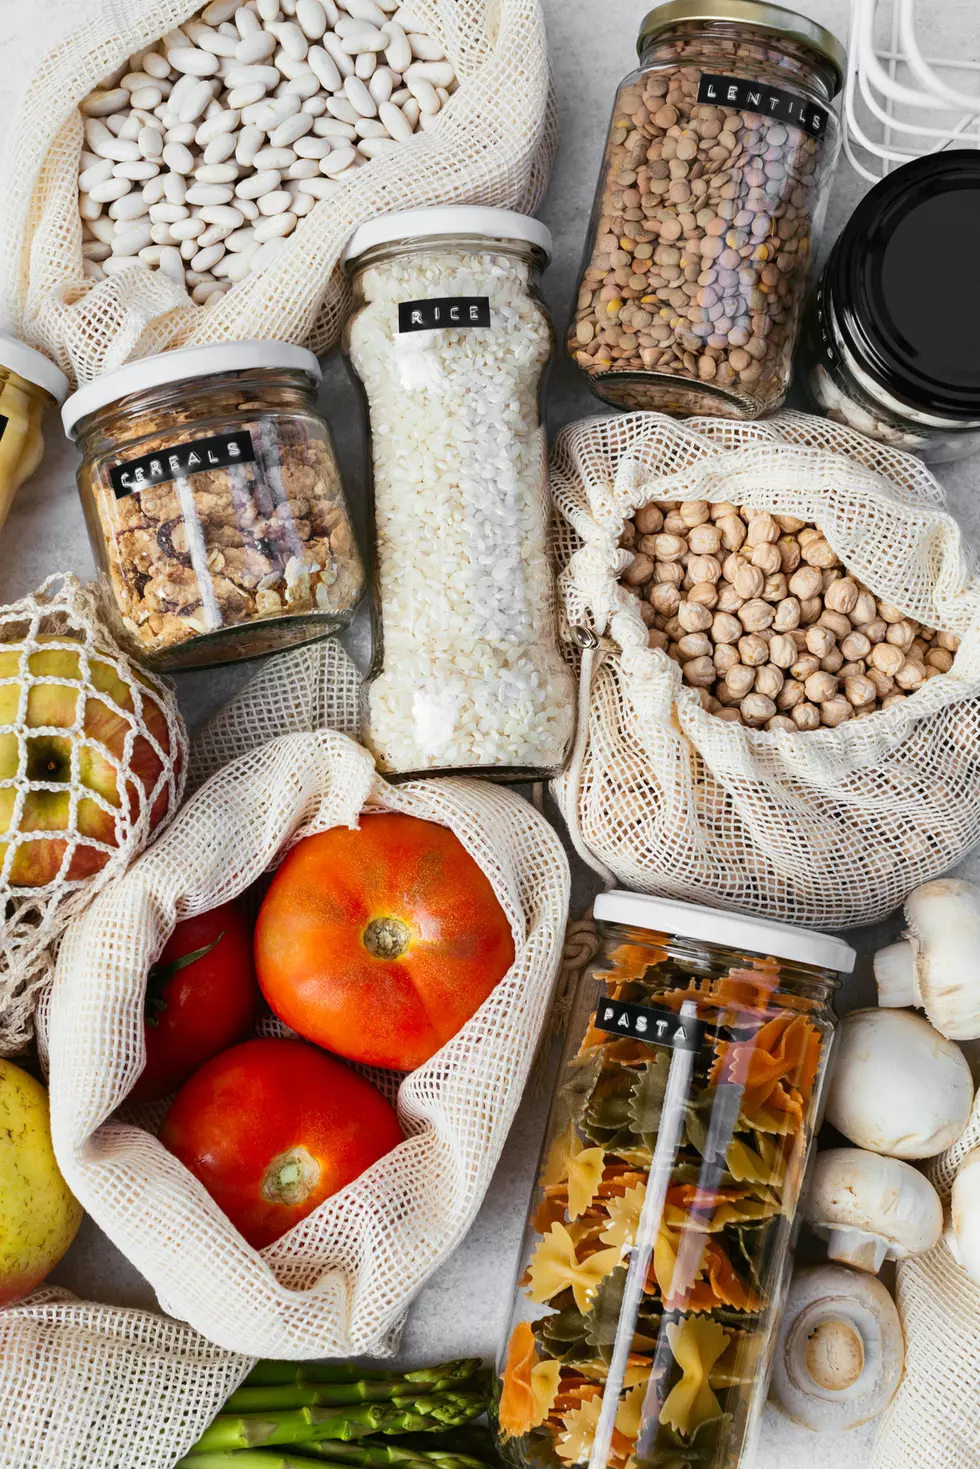 Vegan Pantry Essentials: Stocked And Ready For Any Occasion